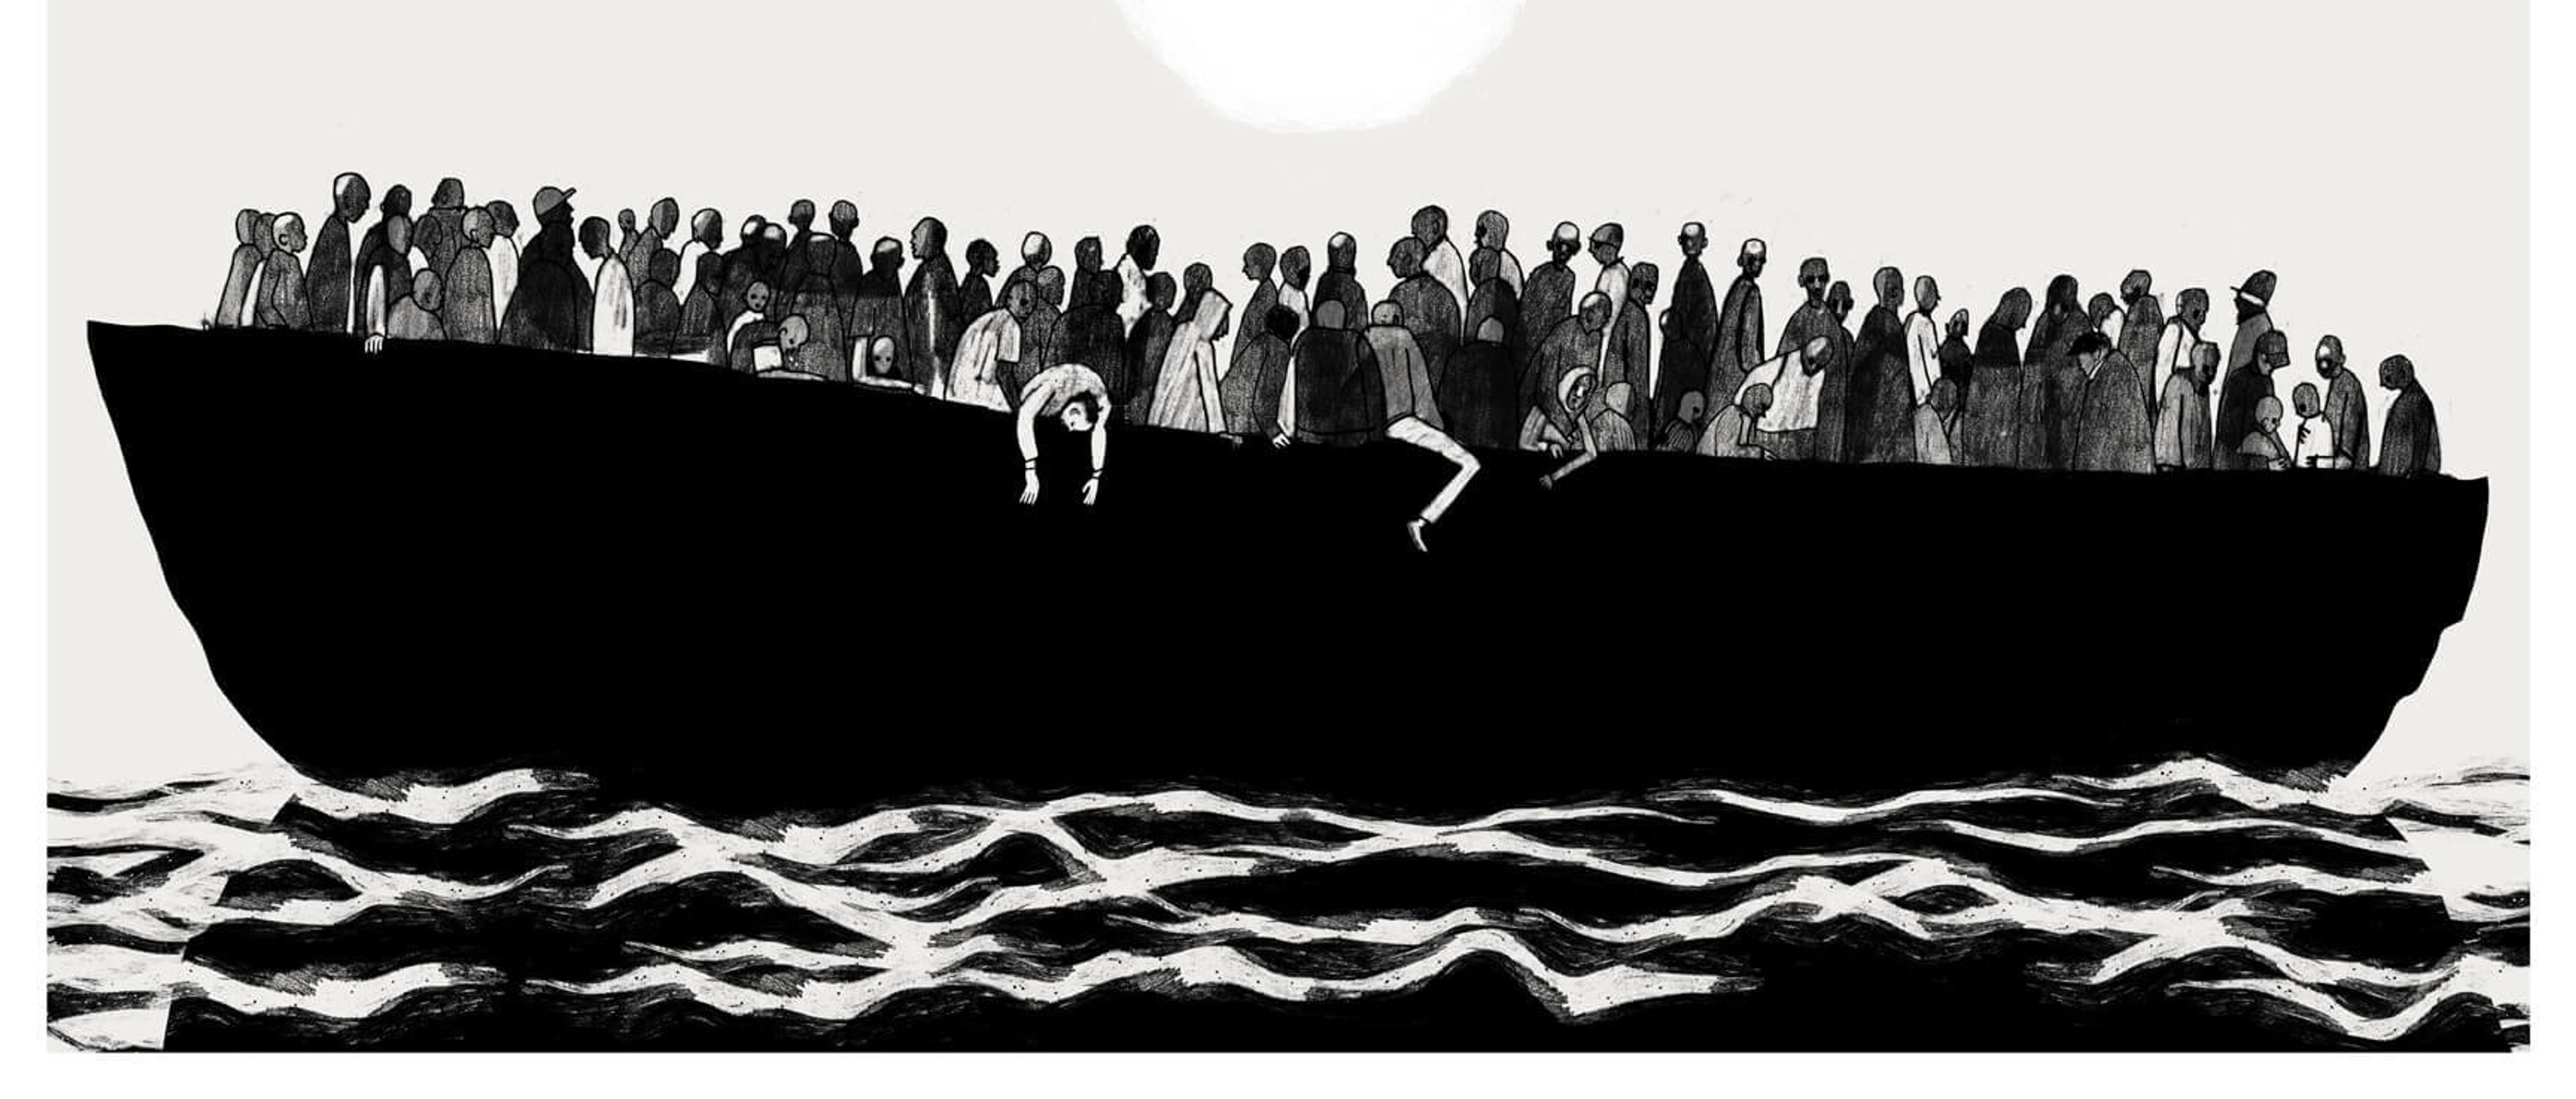 Minimalist black and white ink illustration of refugees on a boat